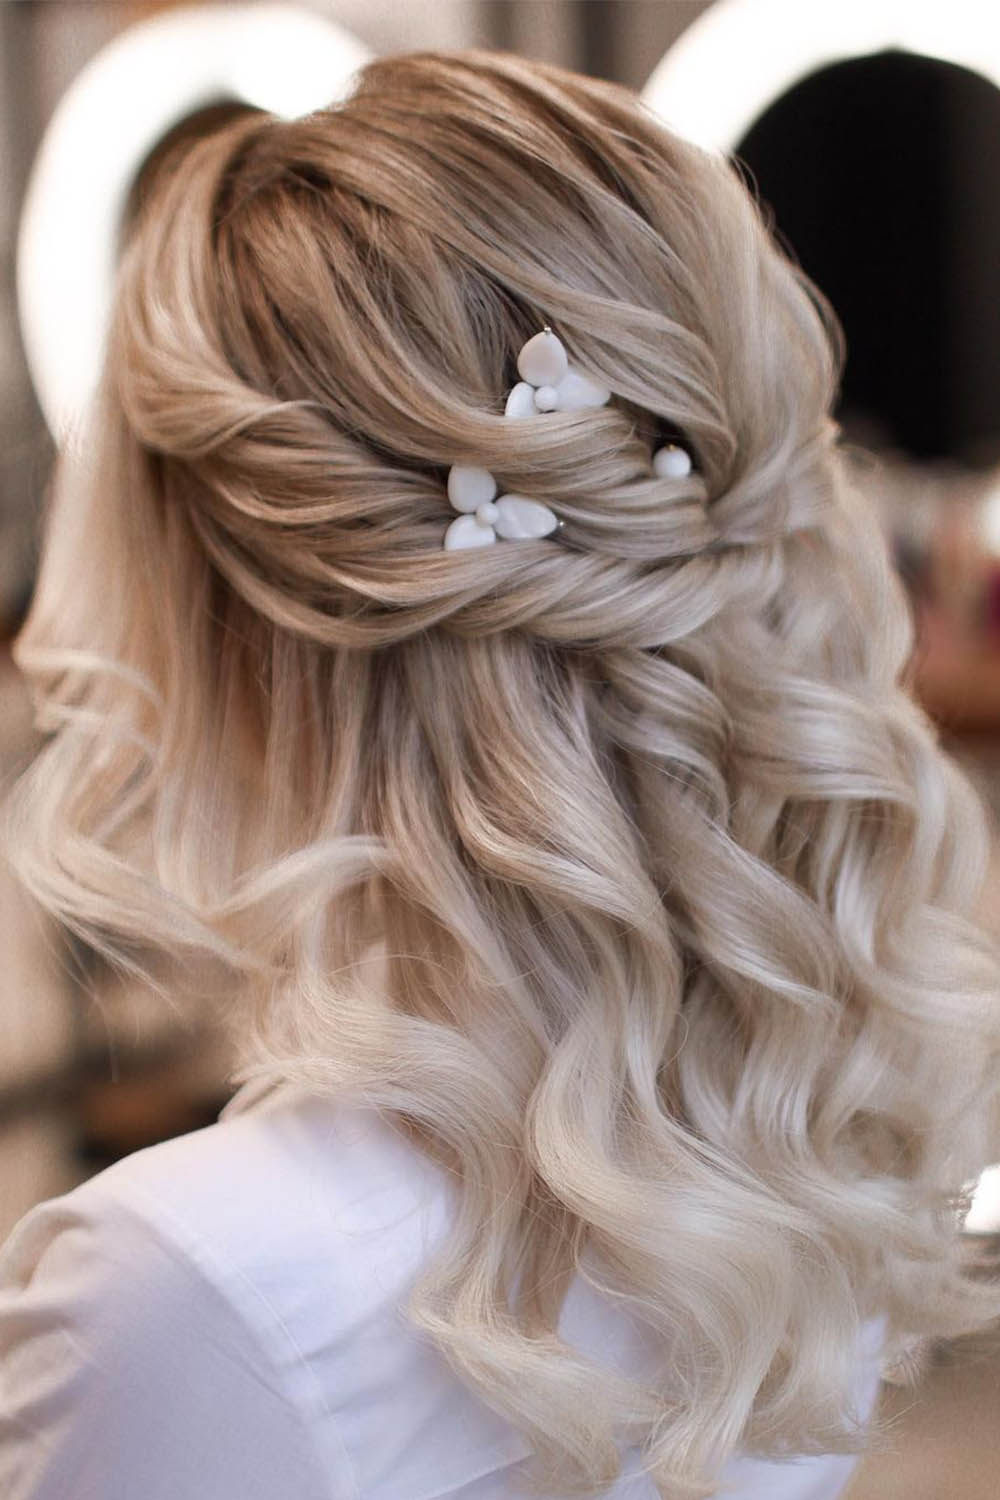 Curly Blonde Hair with Accessories